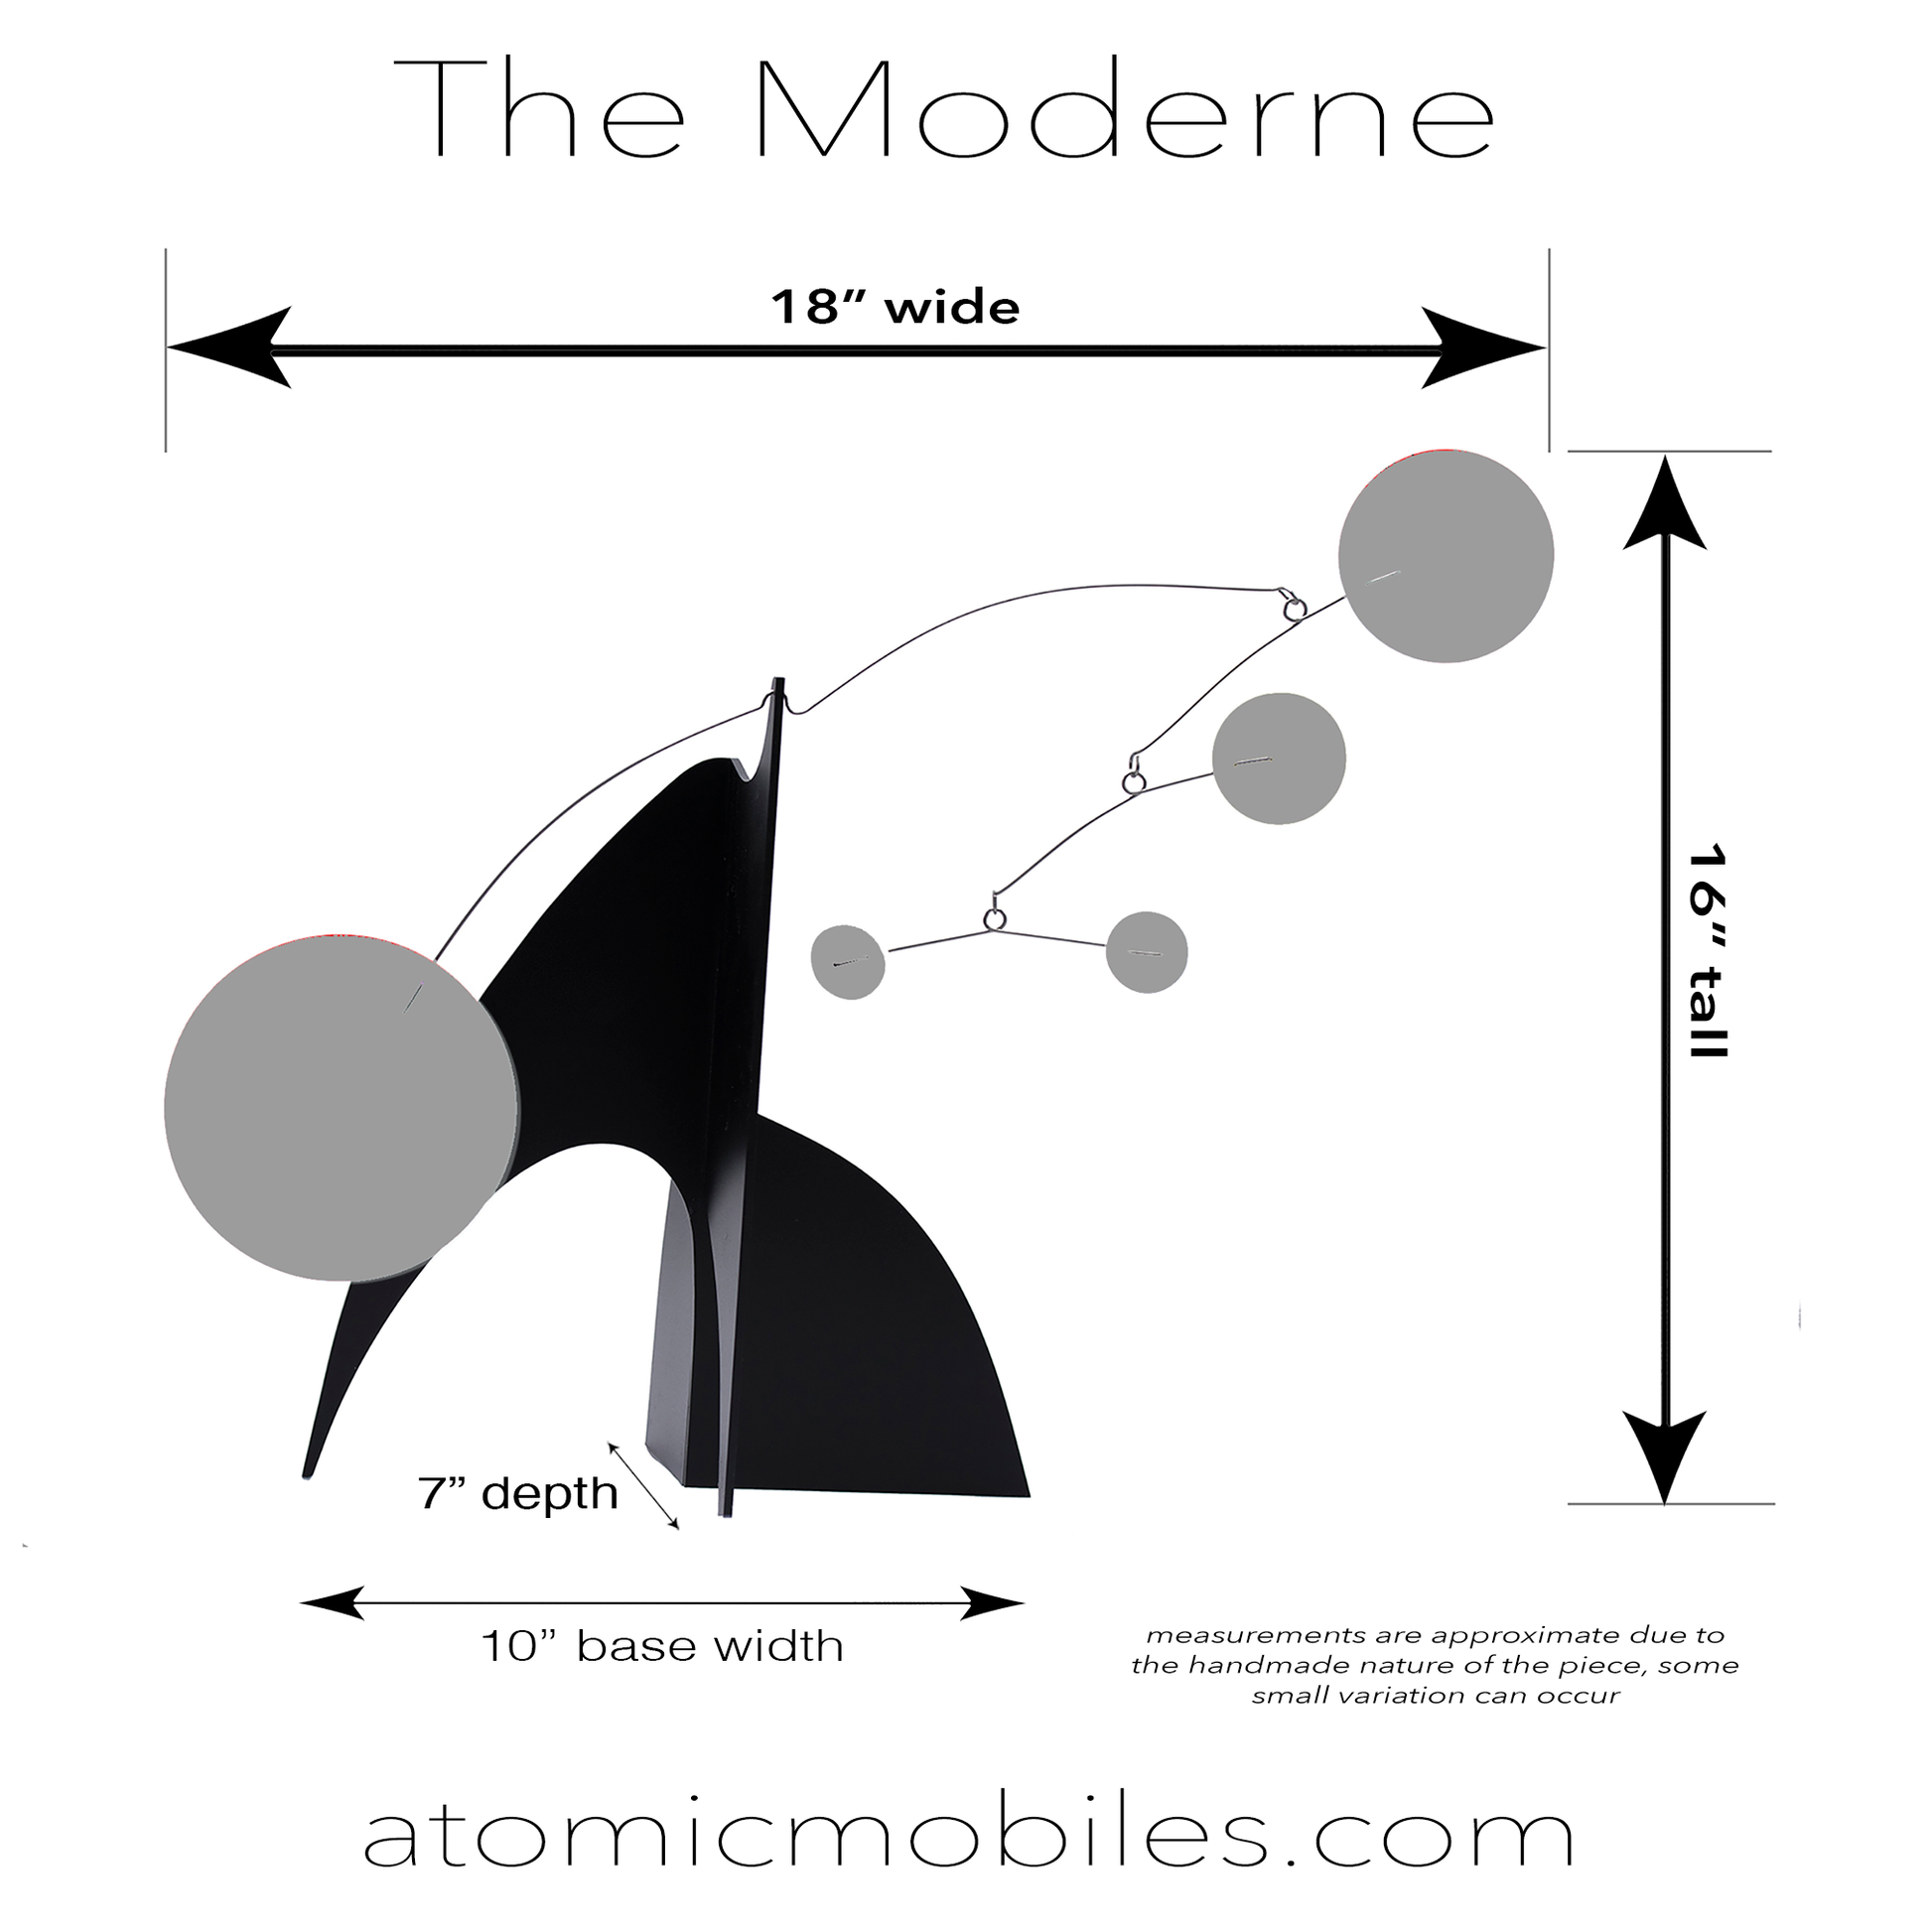 Measurements of mobile parts of Moderne Art Stabile Sculpture by AtomicMobiles.com